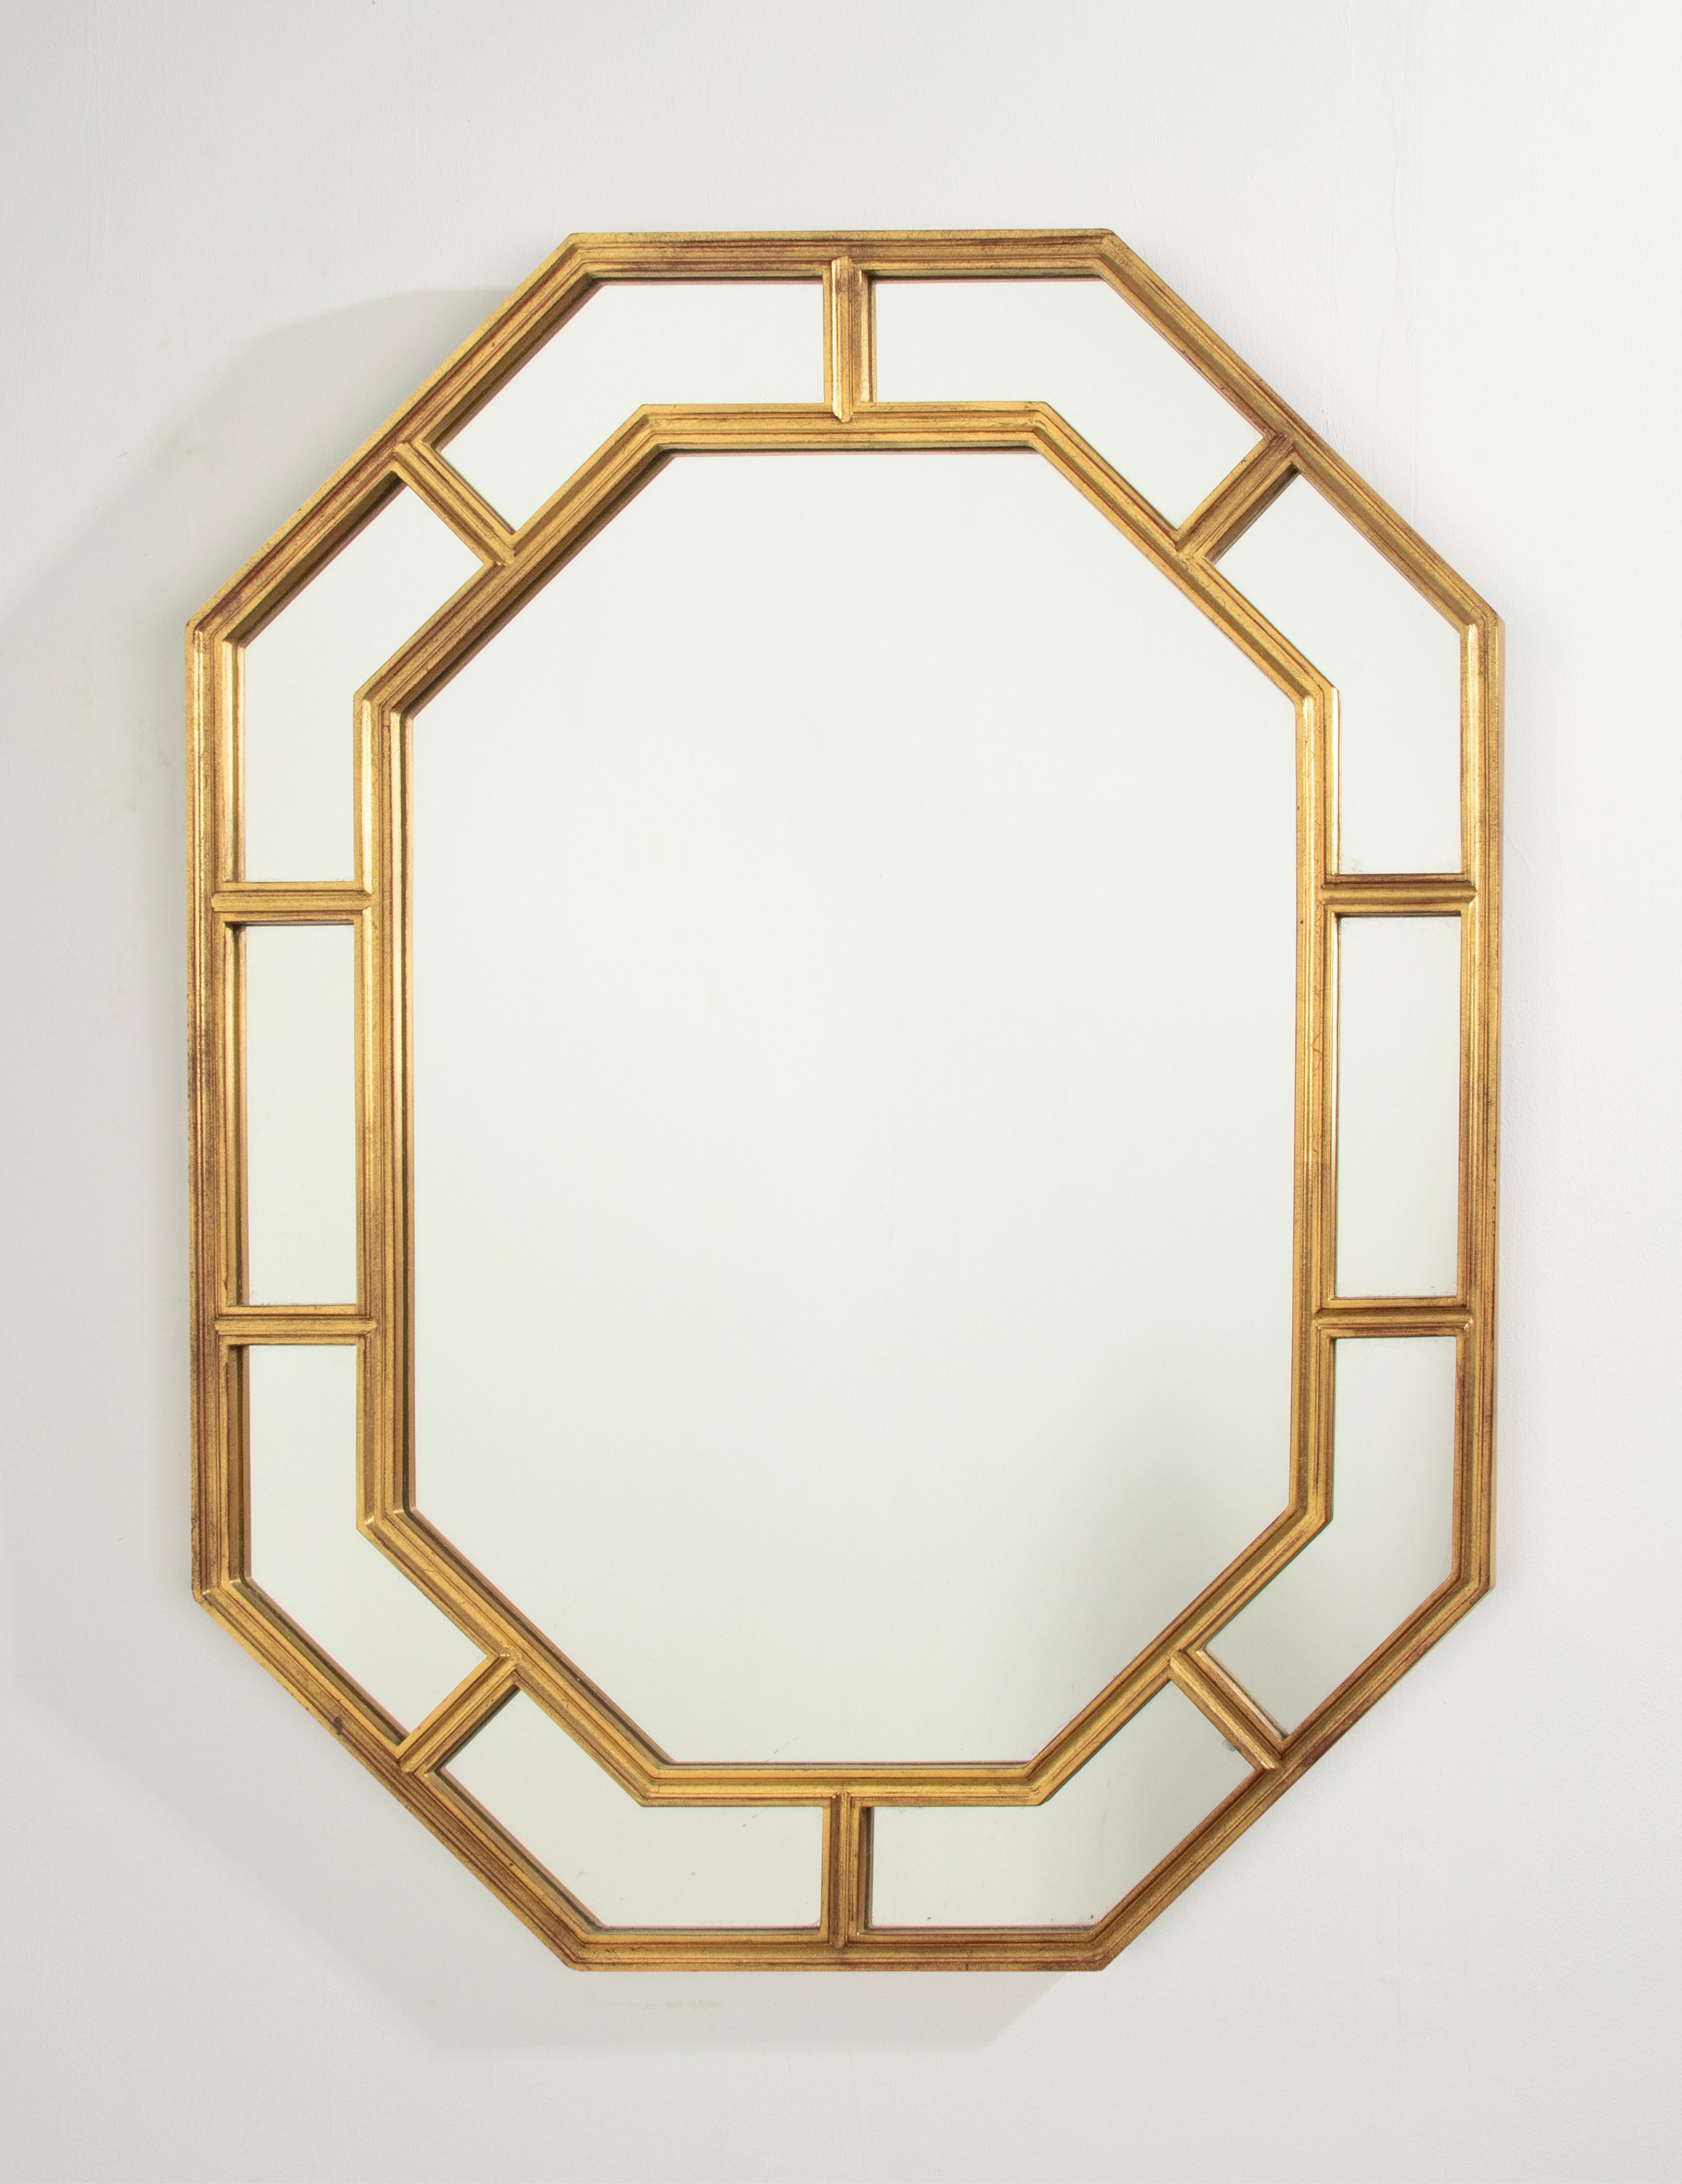 A stylish octagonal wall mirror with side mirror glasses, also called a 